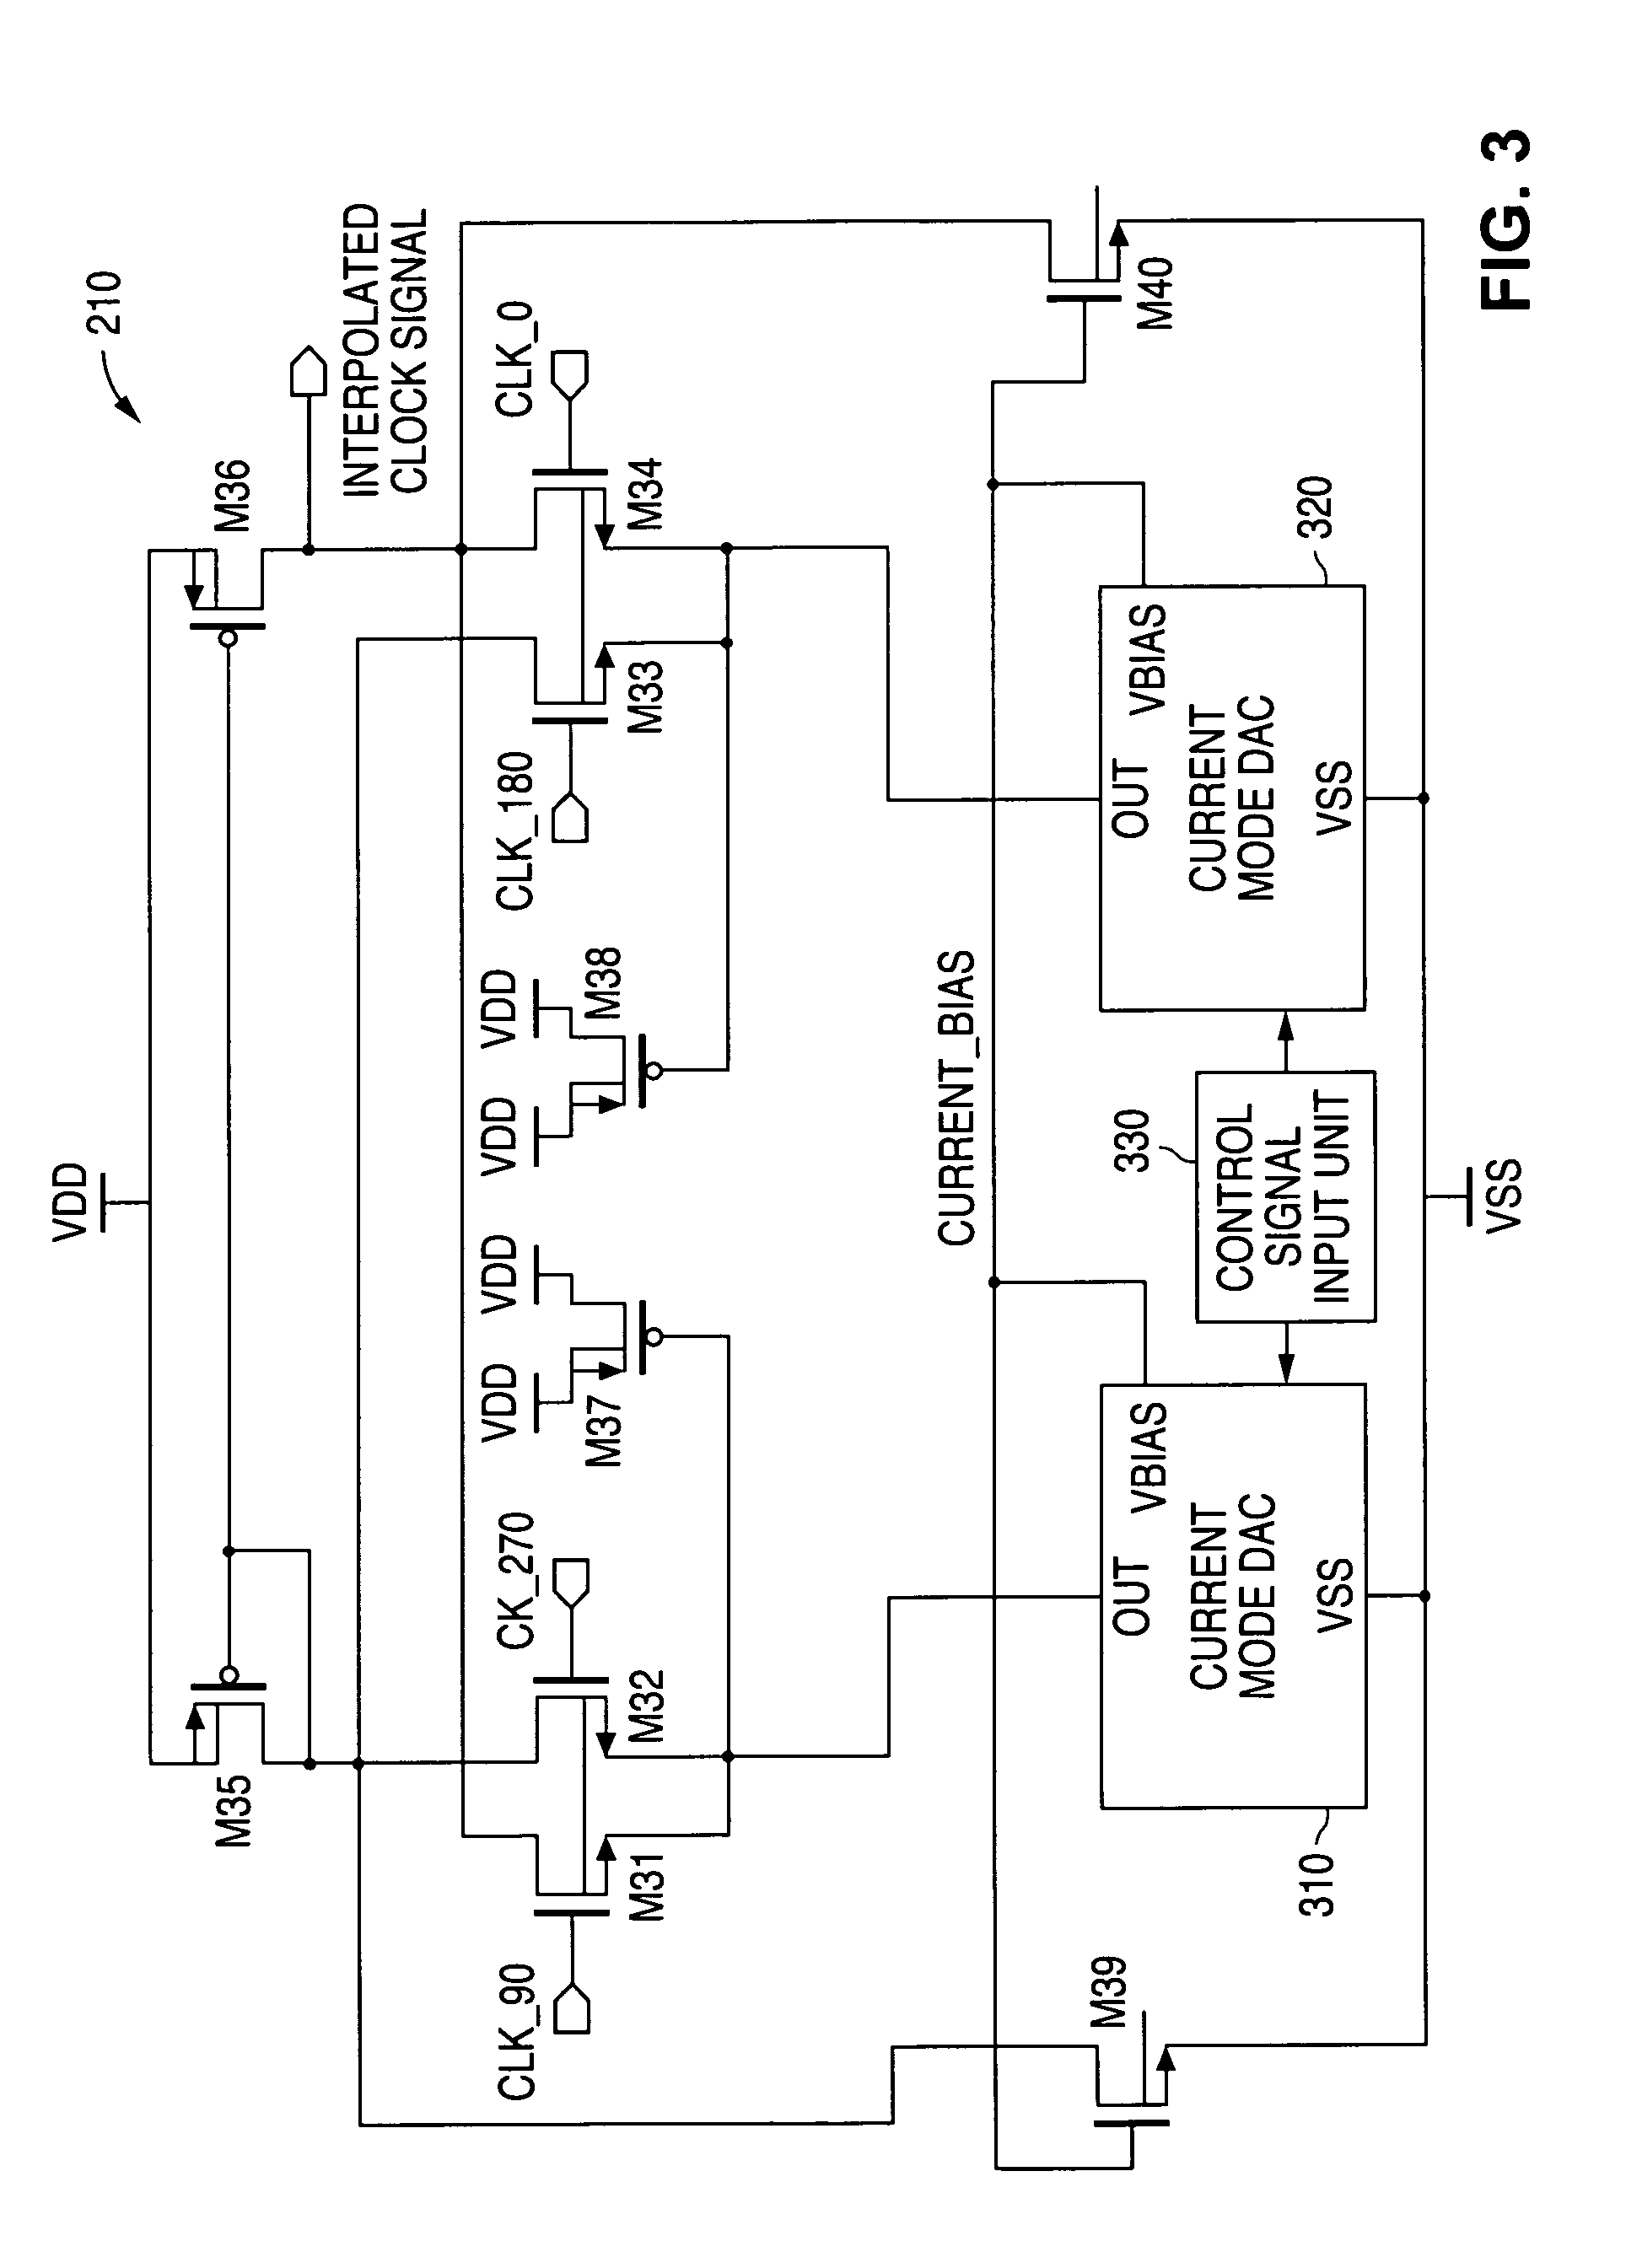 System and method for providing a low jitter data receiver for serial links with a regulated single ended phase interpolator